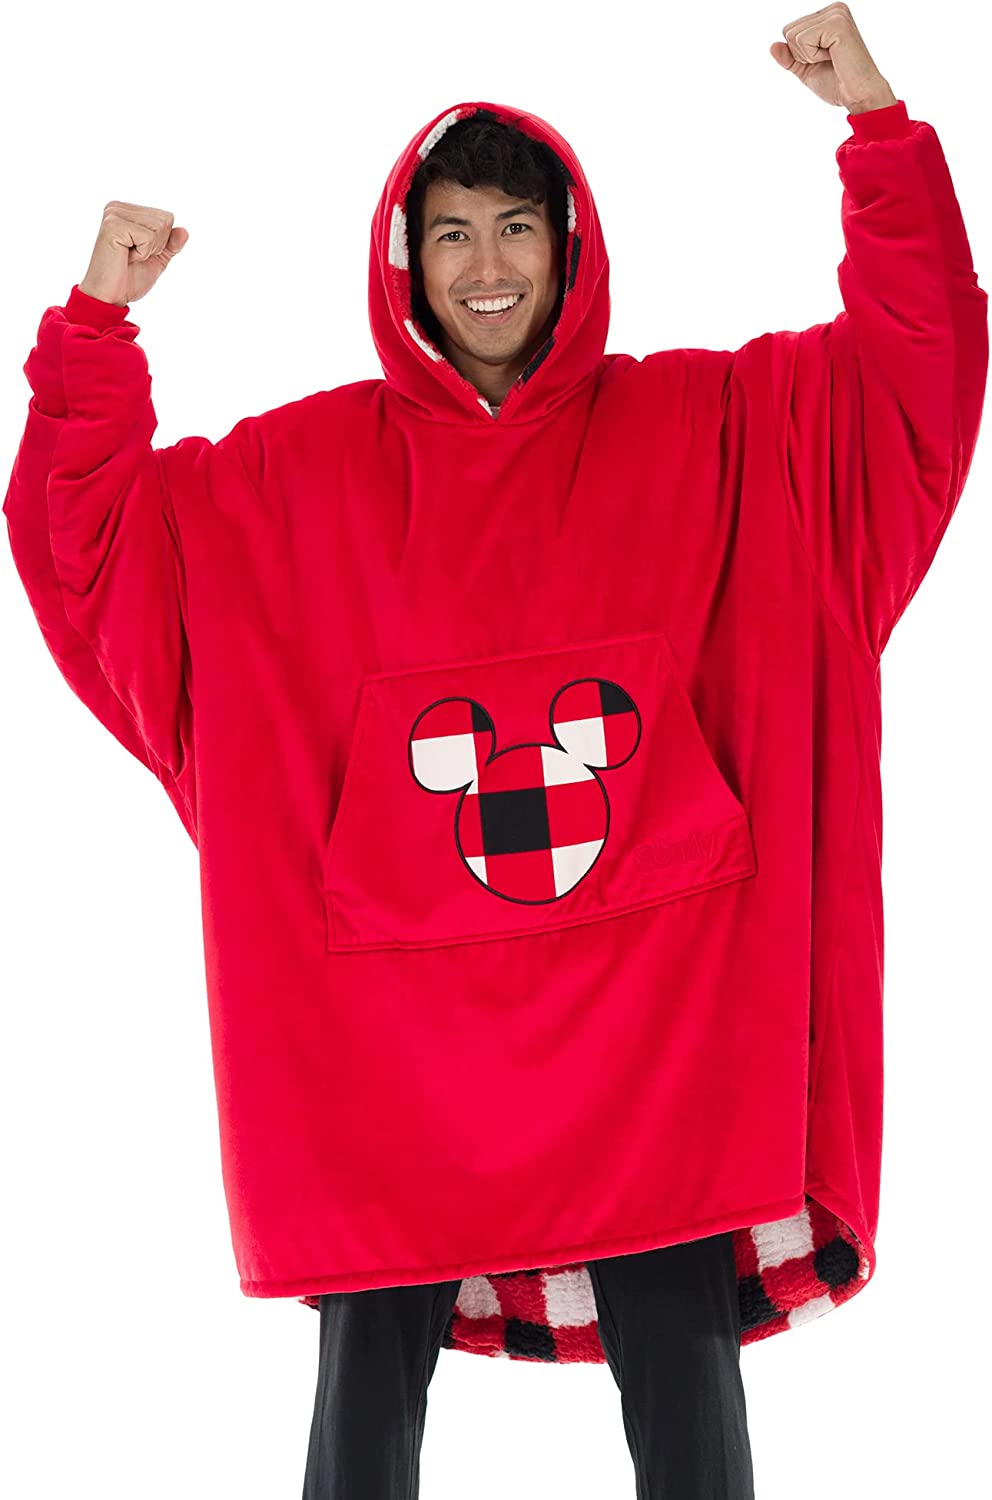 A man is smiling while wearing a bright red wearable oversized blanket.